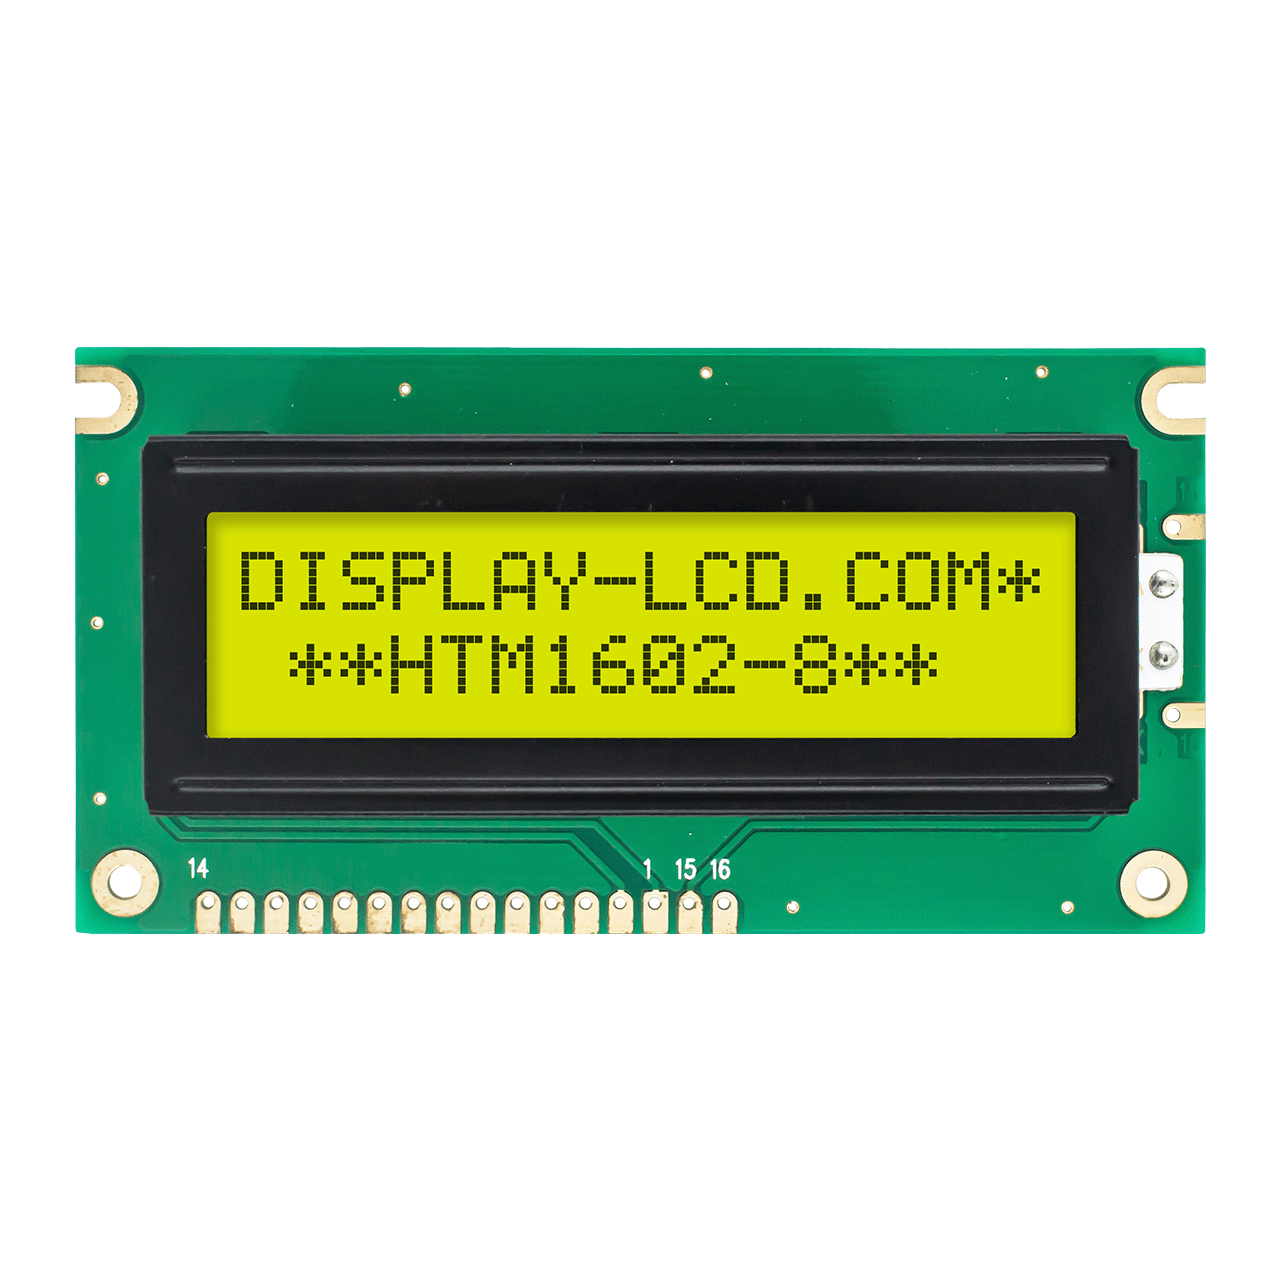 2X16 Character LCD Module Display | STN+ Yellow/Green with Side Yellow/Green Backlight-Arduino